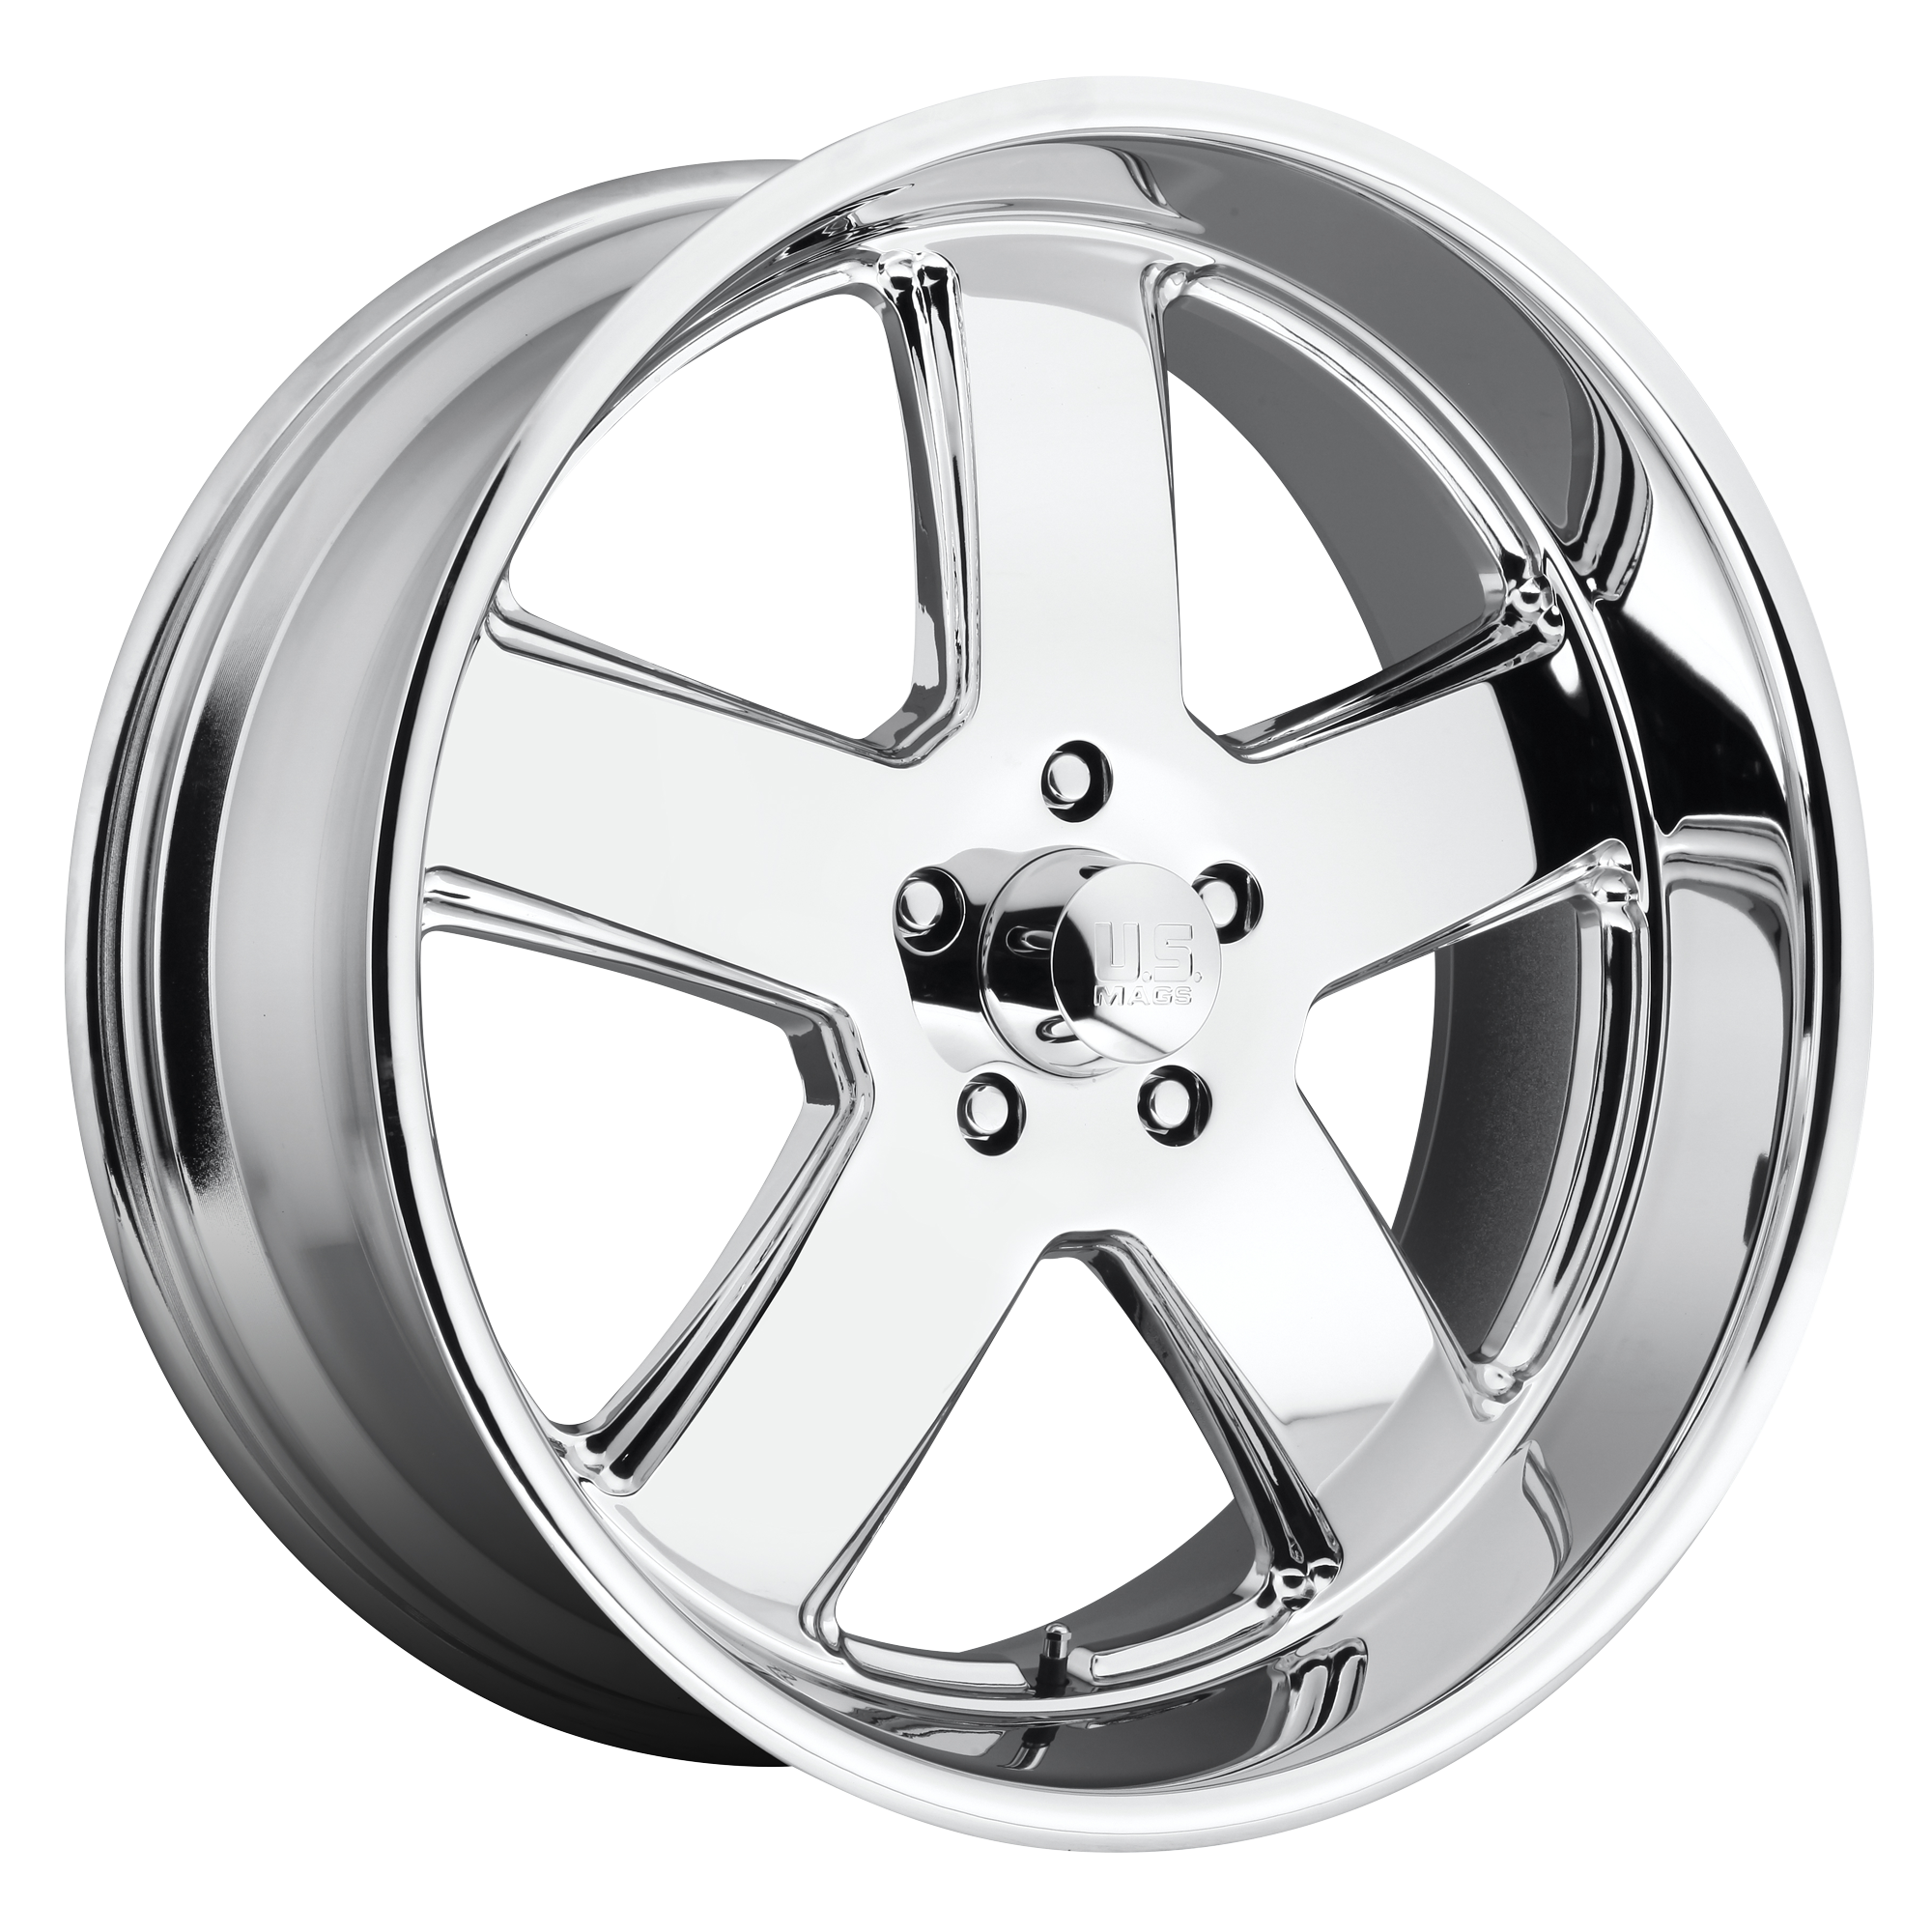 HUSTLER 20x8 5x120.65 CHROME PLATED (1 mm) - Tires and Engine Performance